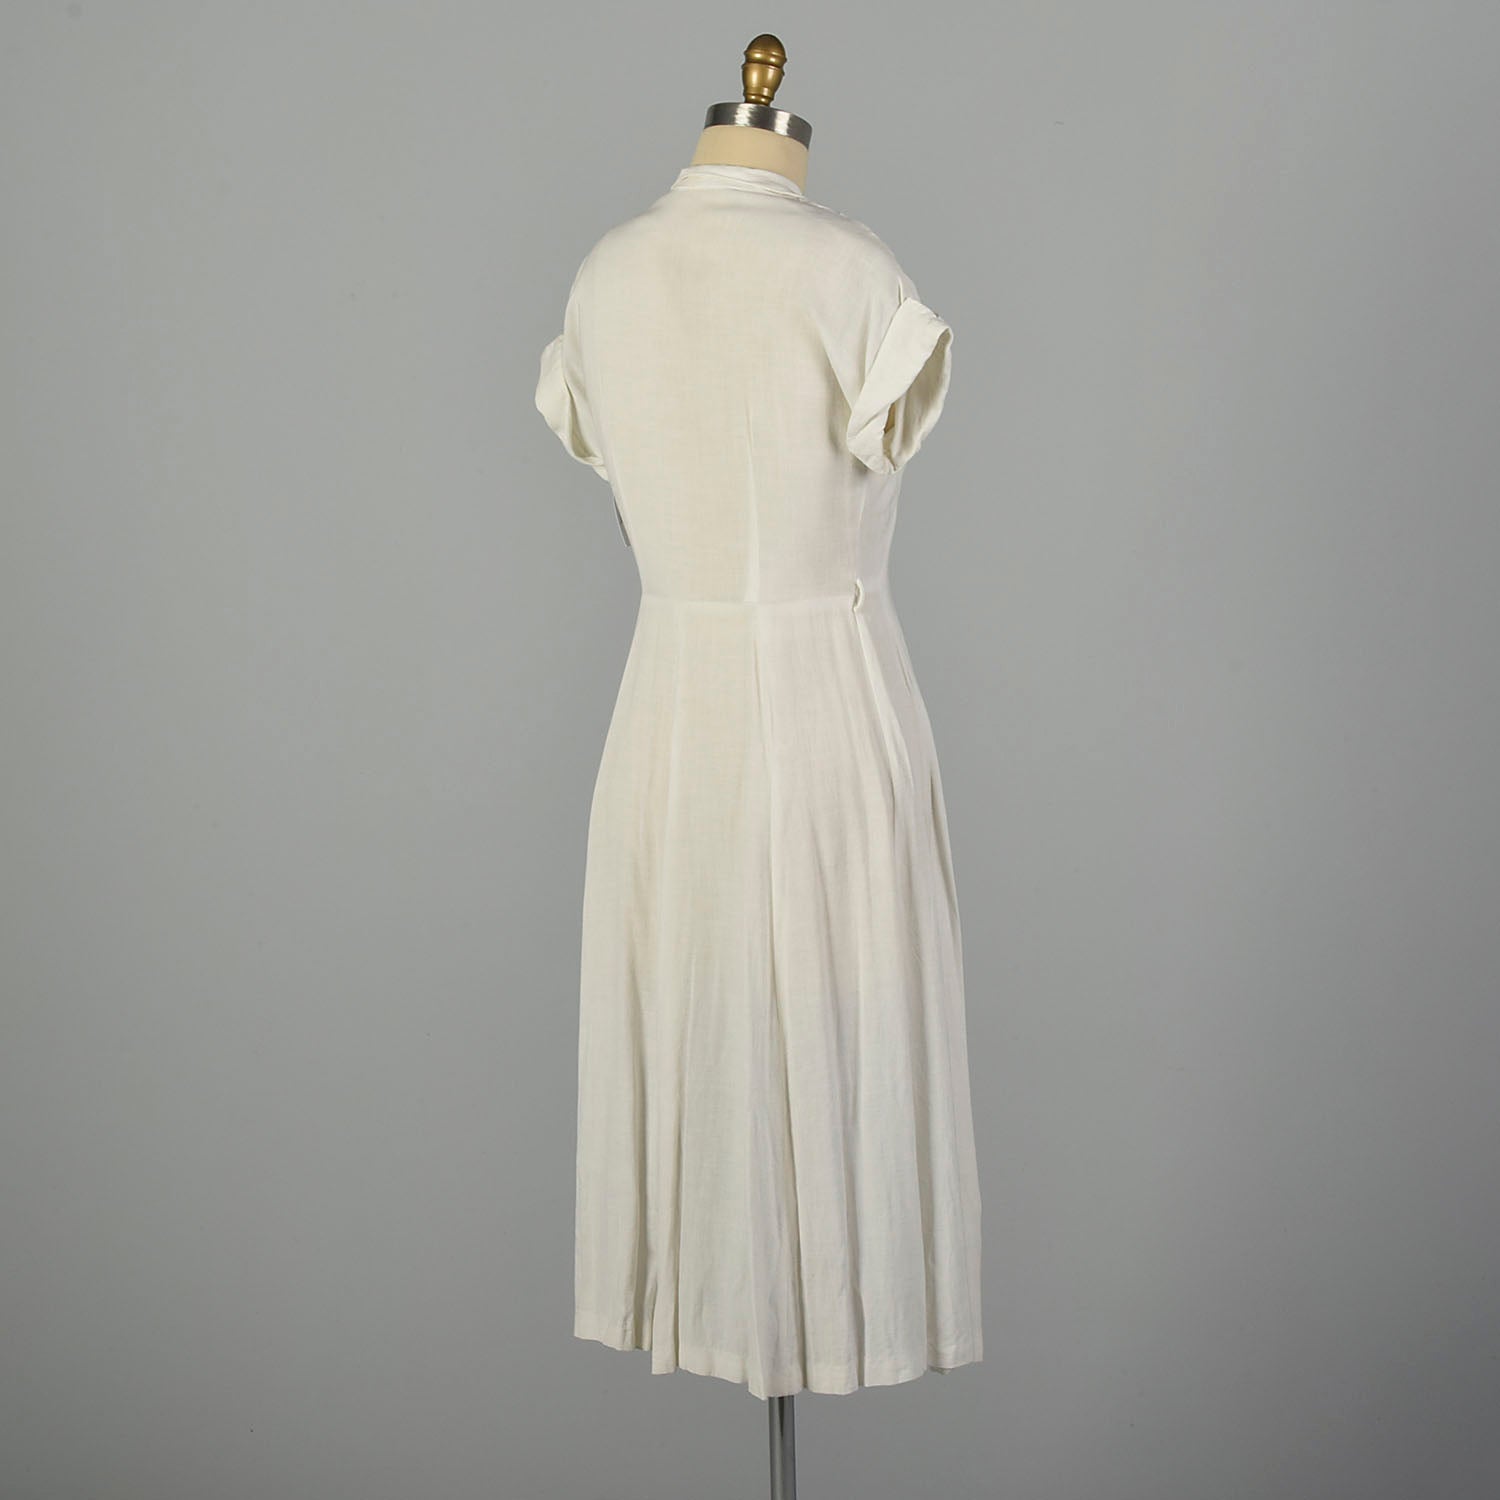 Medium 1950s White Rayon Summer Casual Dress with Pearl Neckline